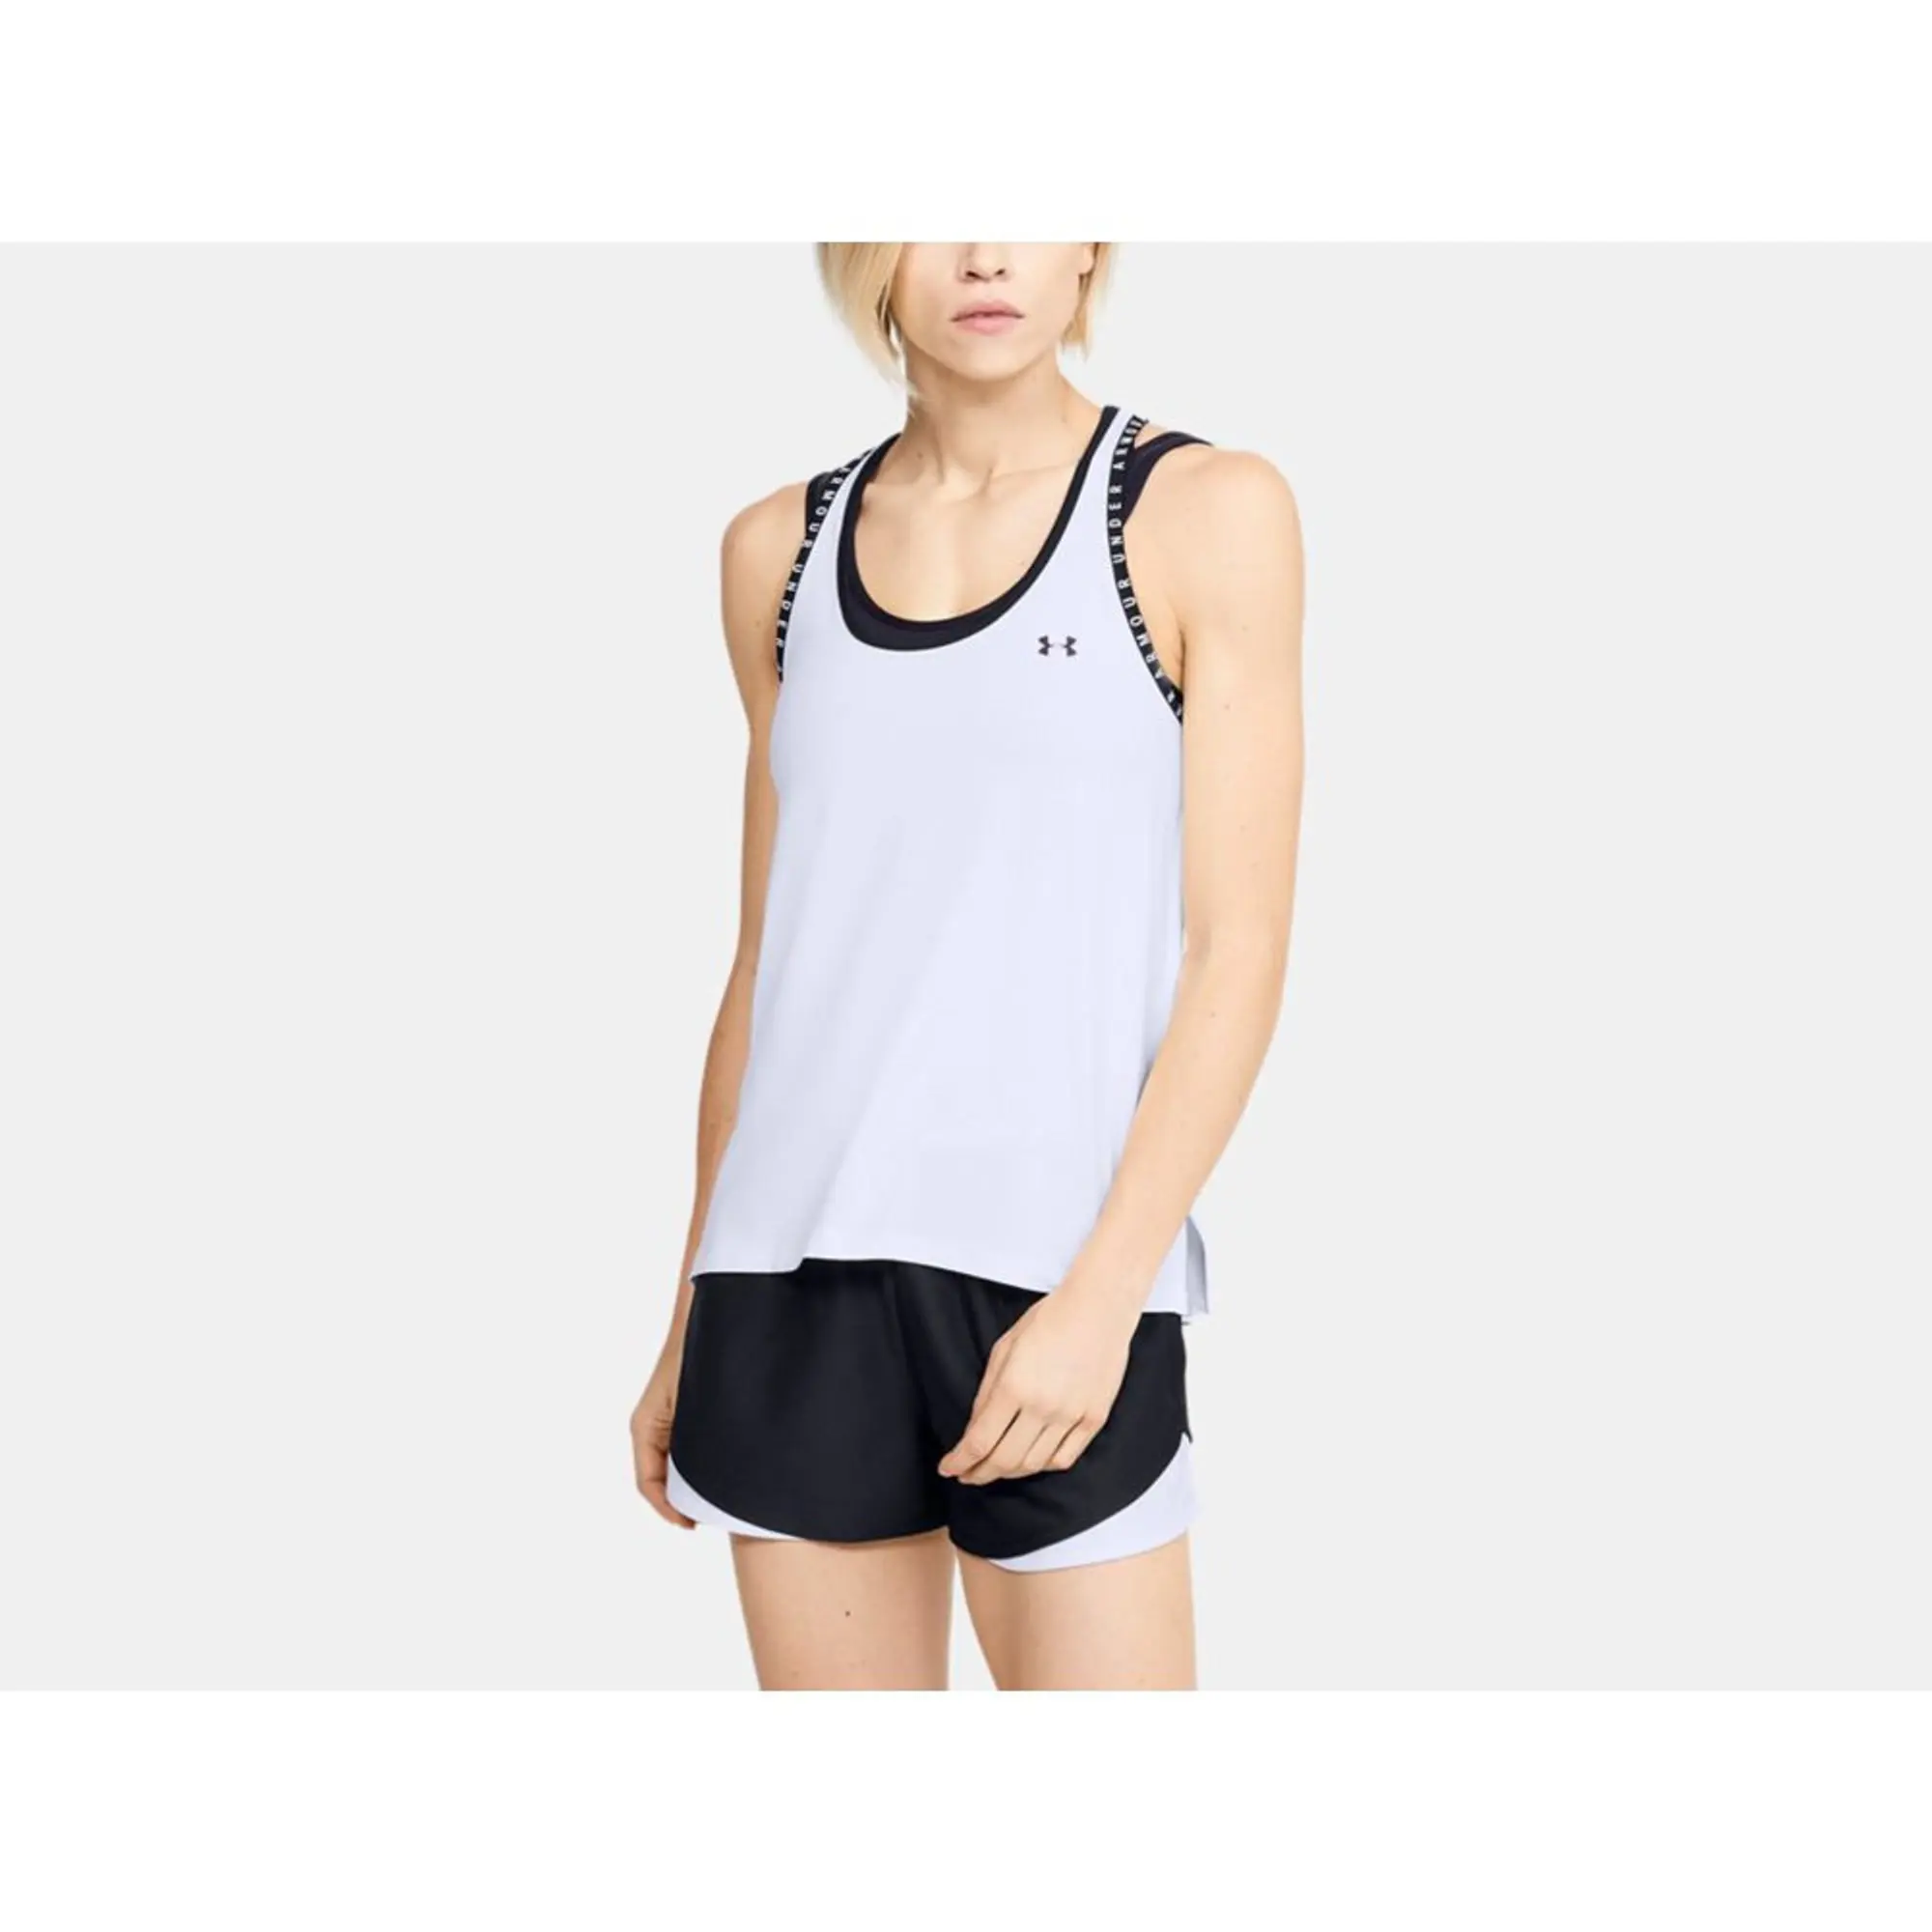 Under Armour Womens Knockout Tank Top - Black